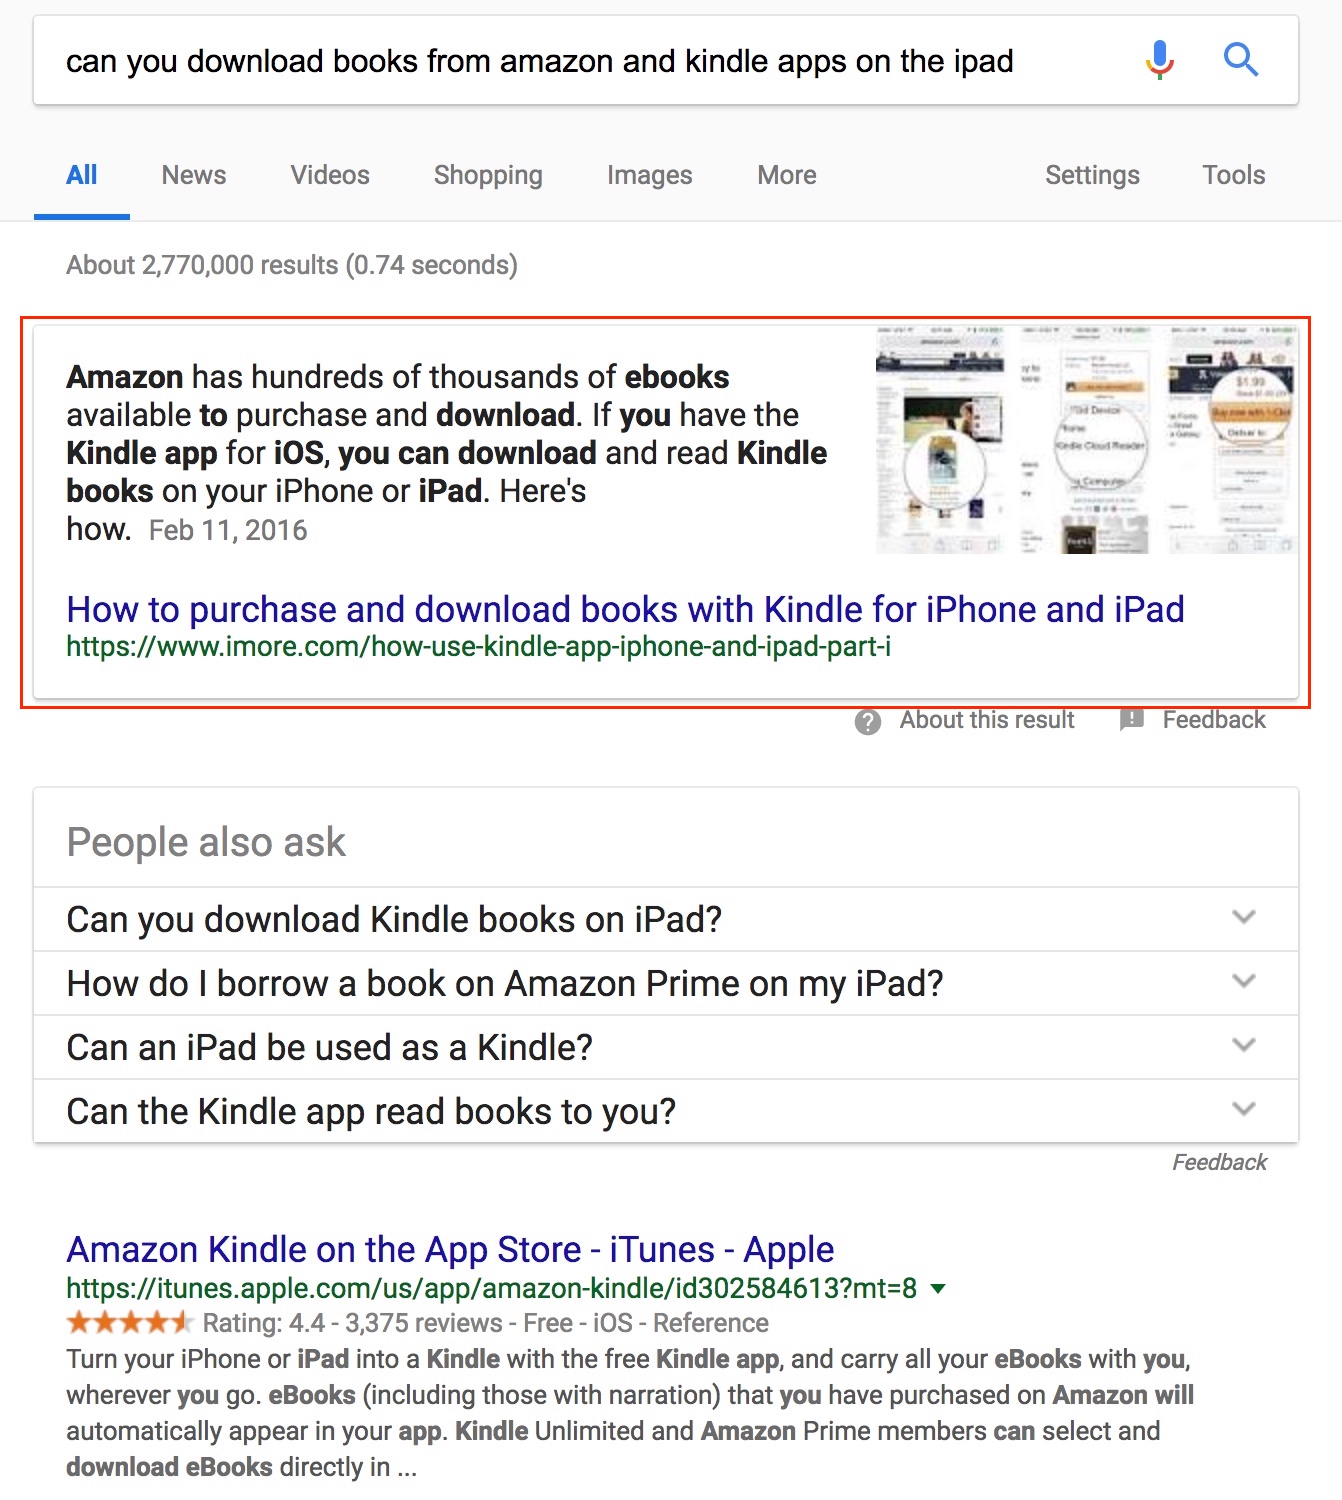 Screenshot showing google search results